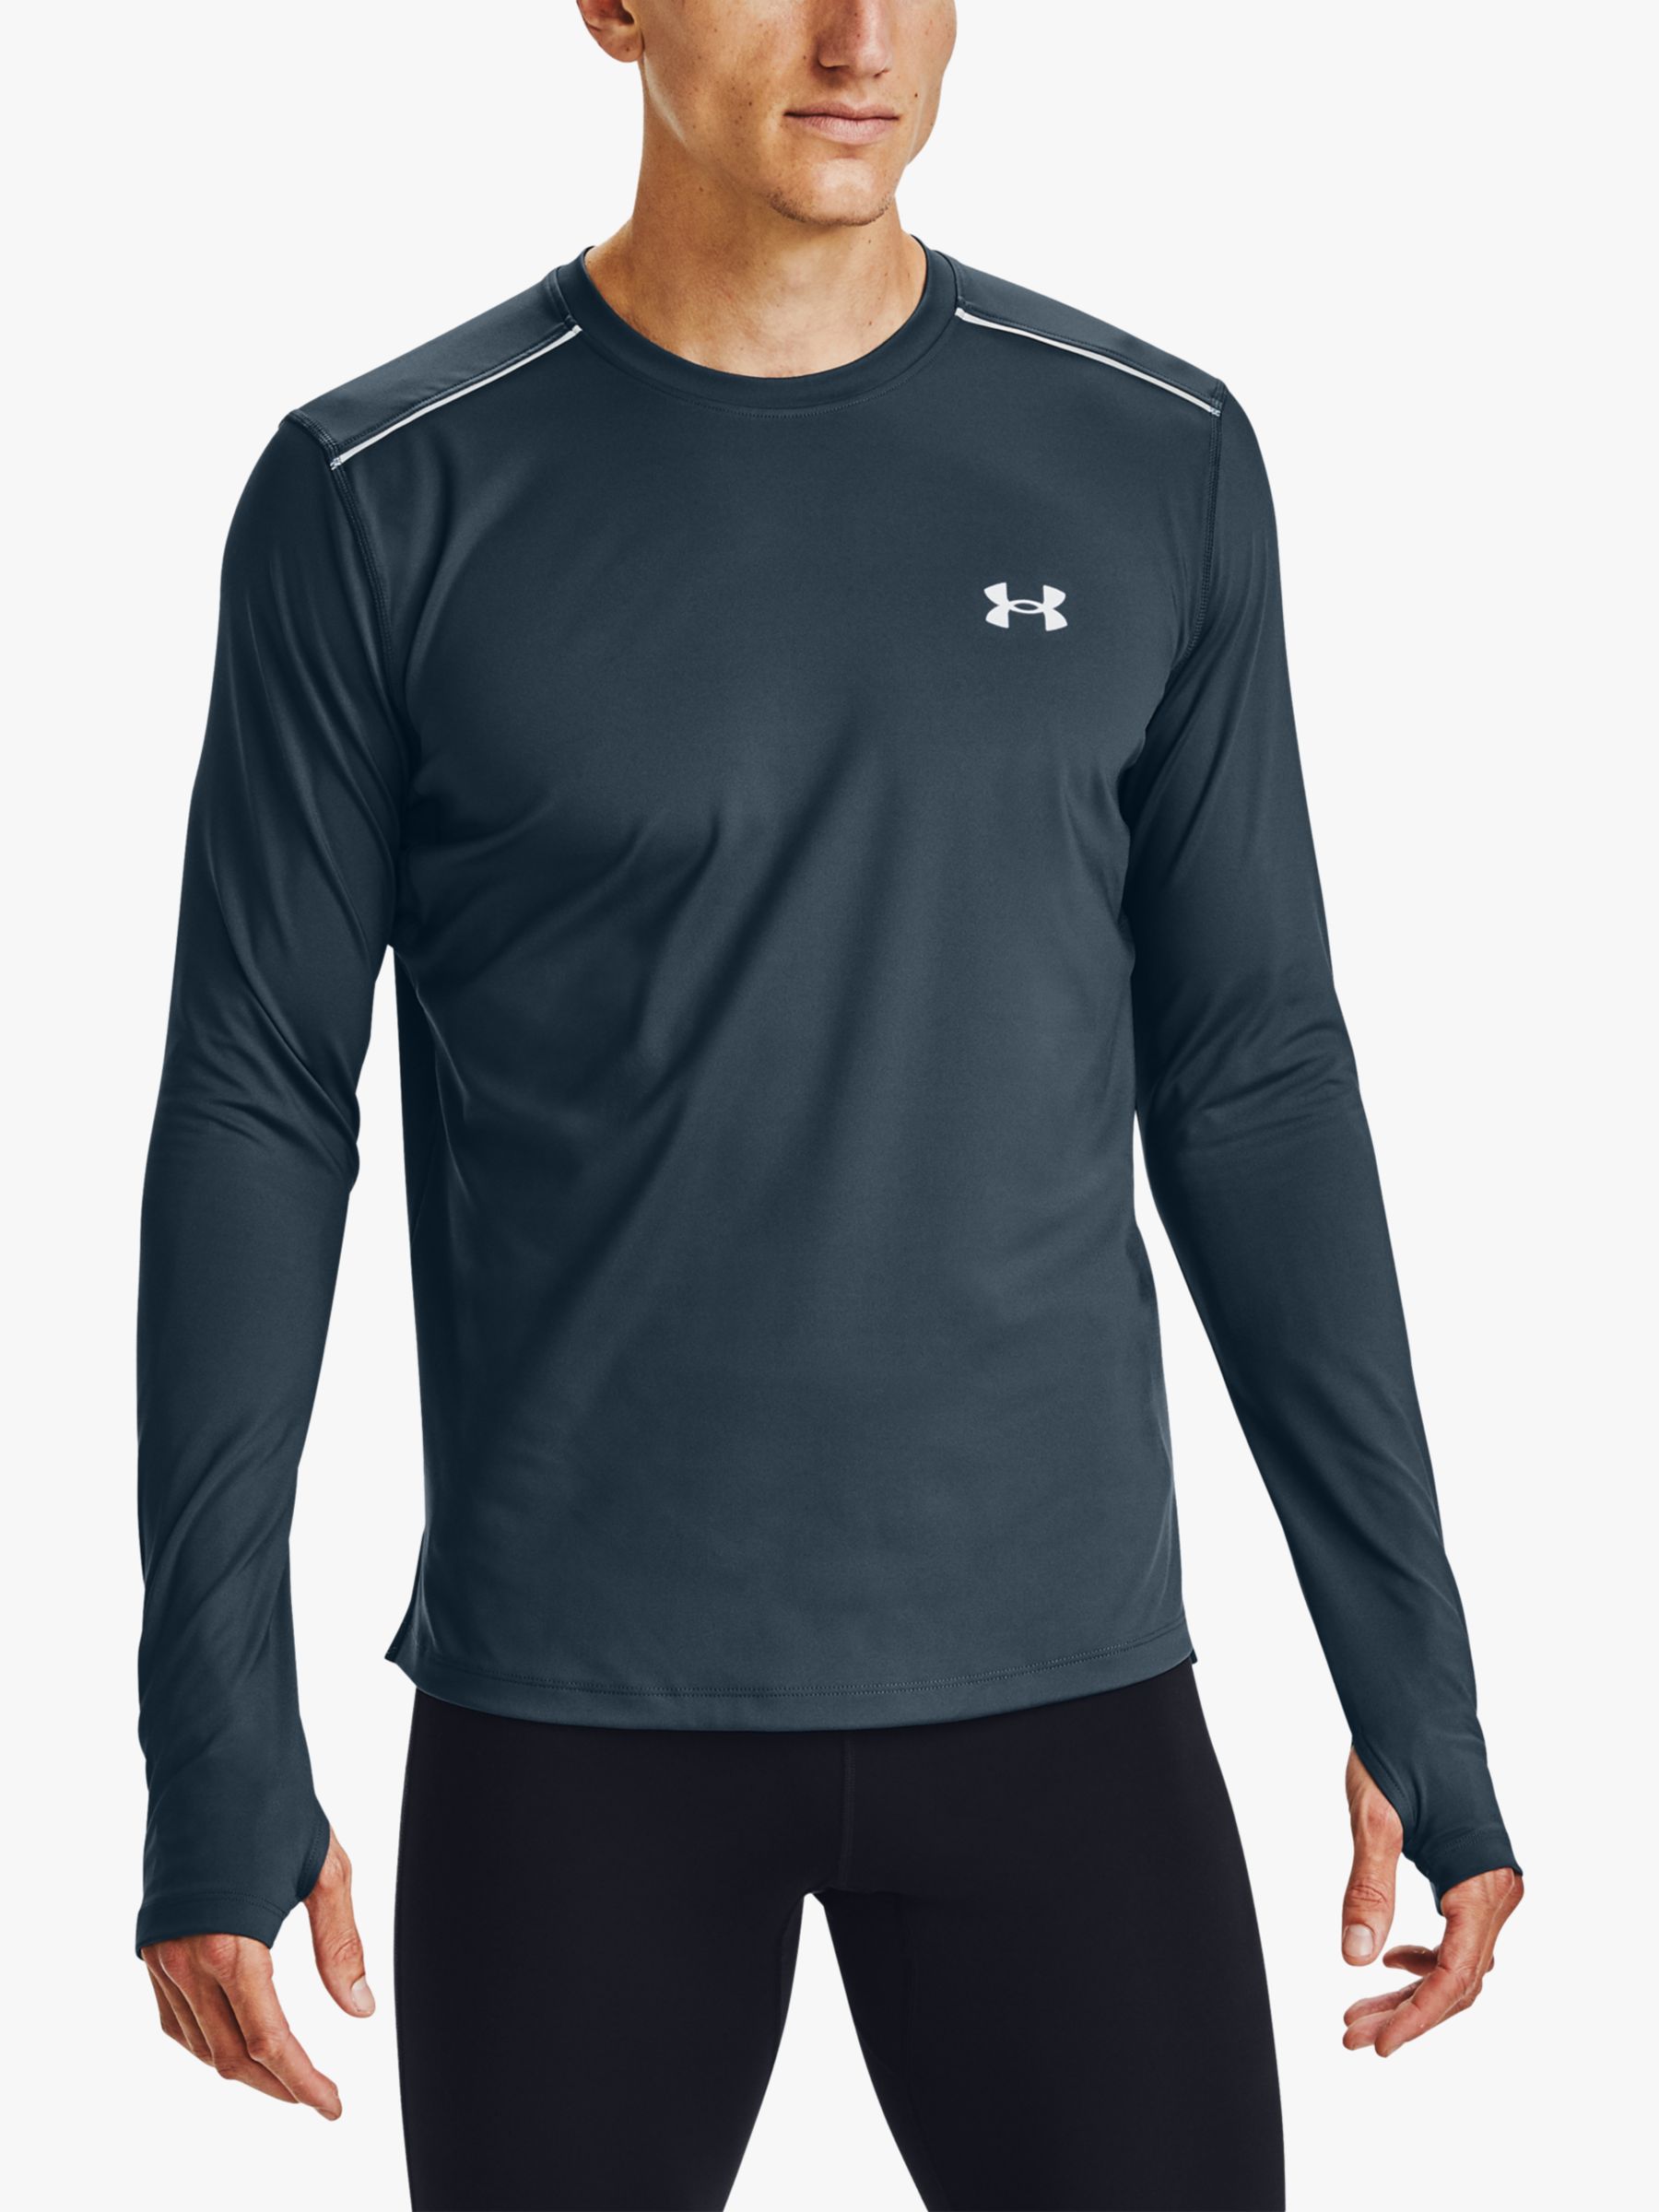 Under Armour Empowered Long Sleeve Running Top at John Lewis & Partners